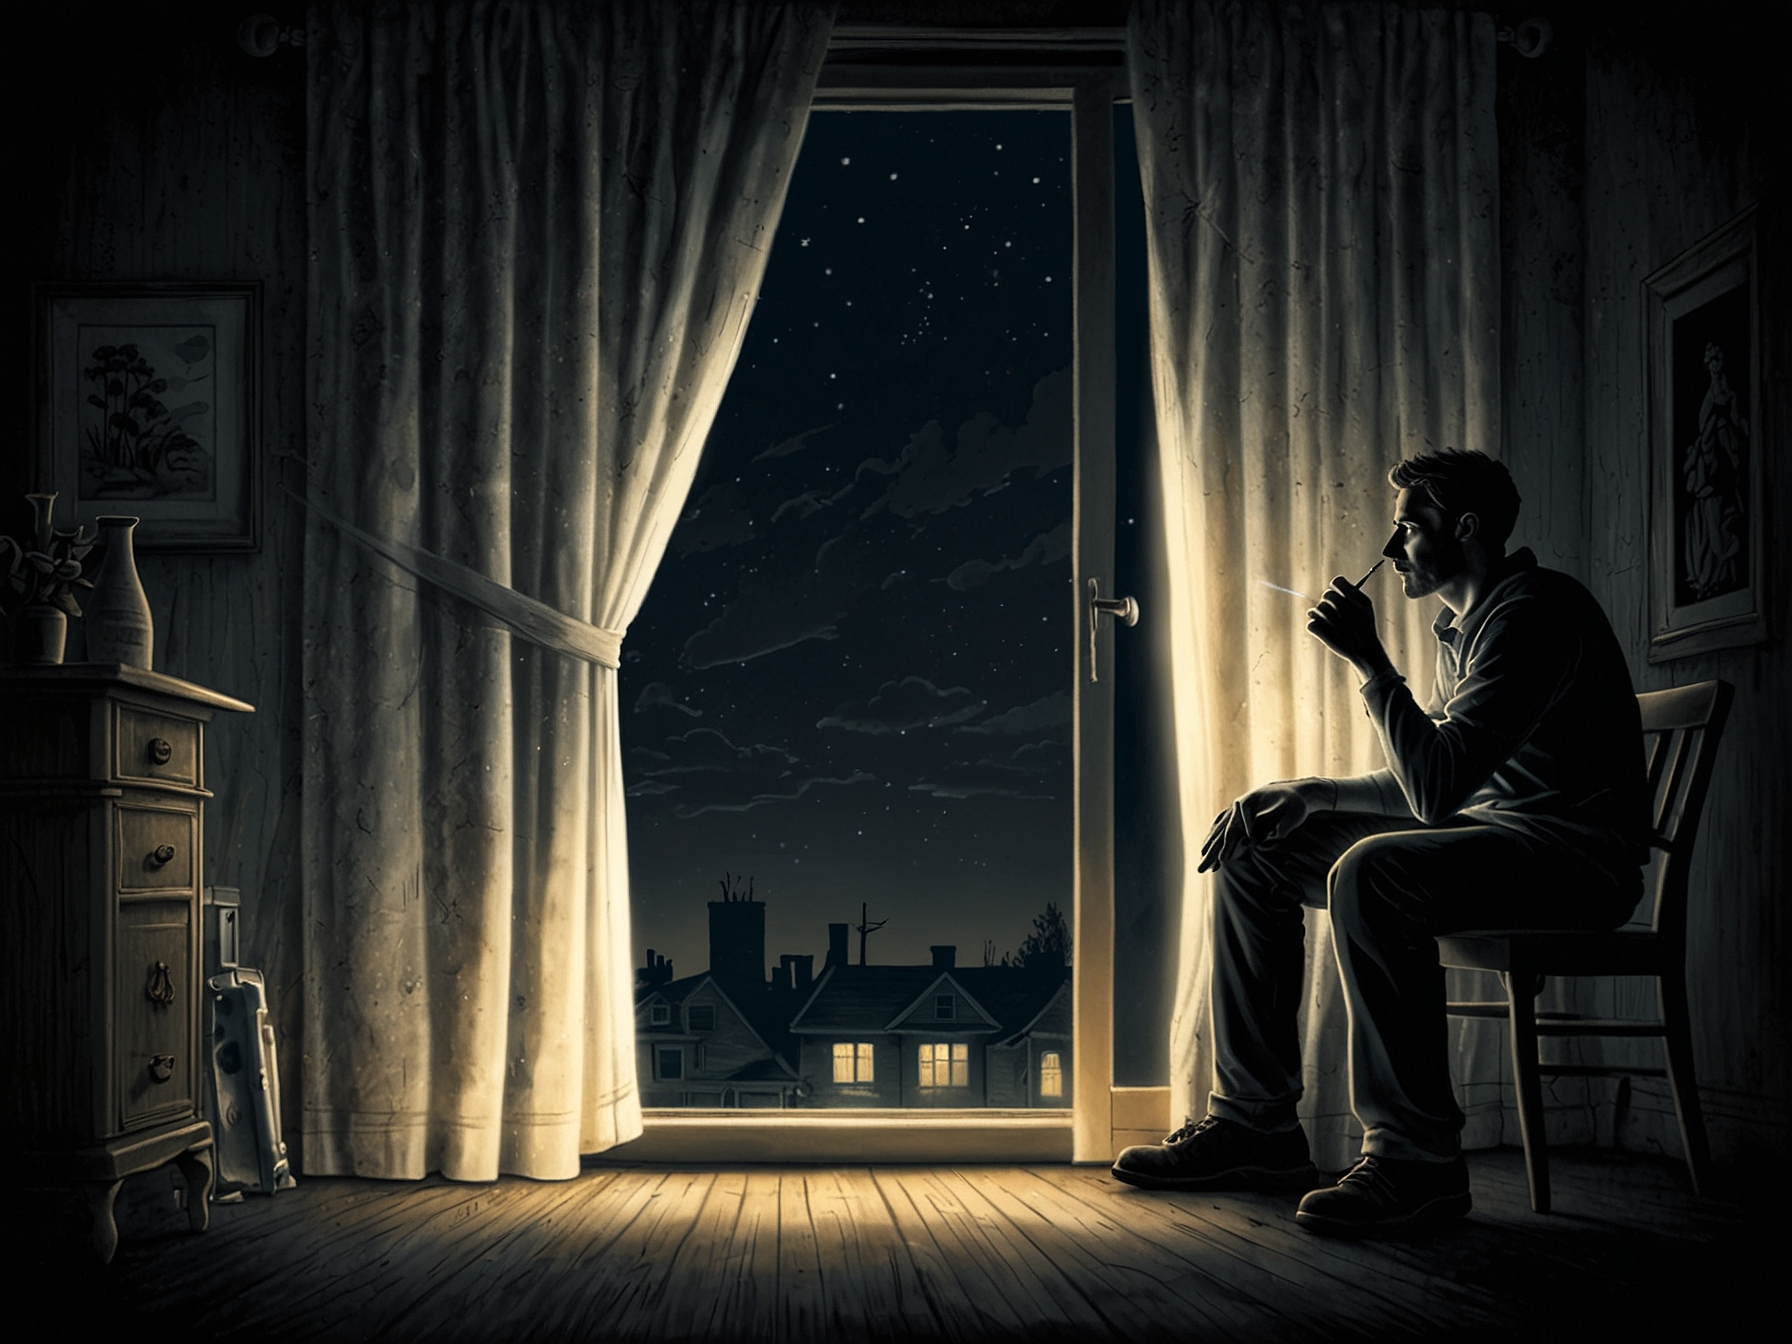 A homeowner inspecting their curtains at night with a flashlight, highlighting the need for vigilance and awareness against potential threats lurking behind drapes.